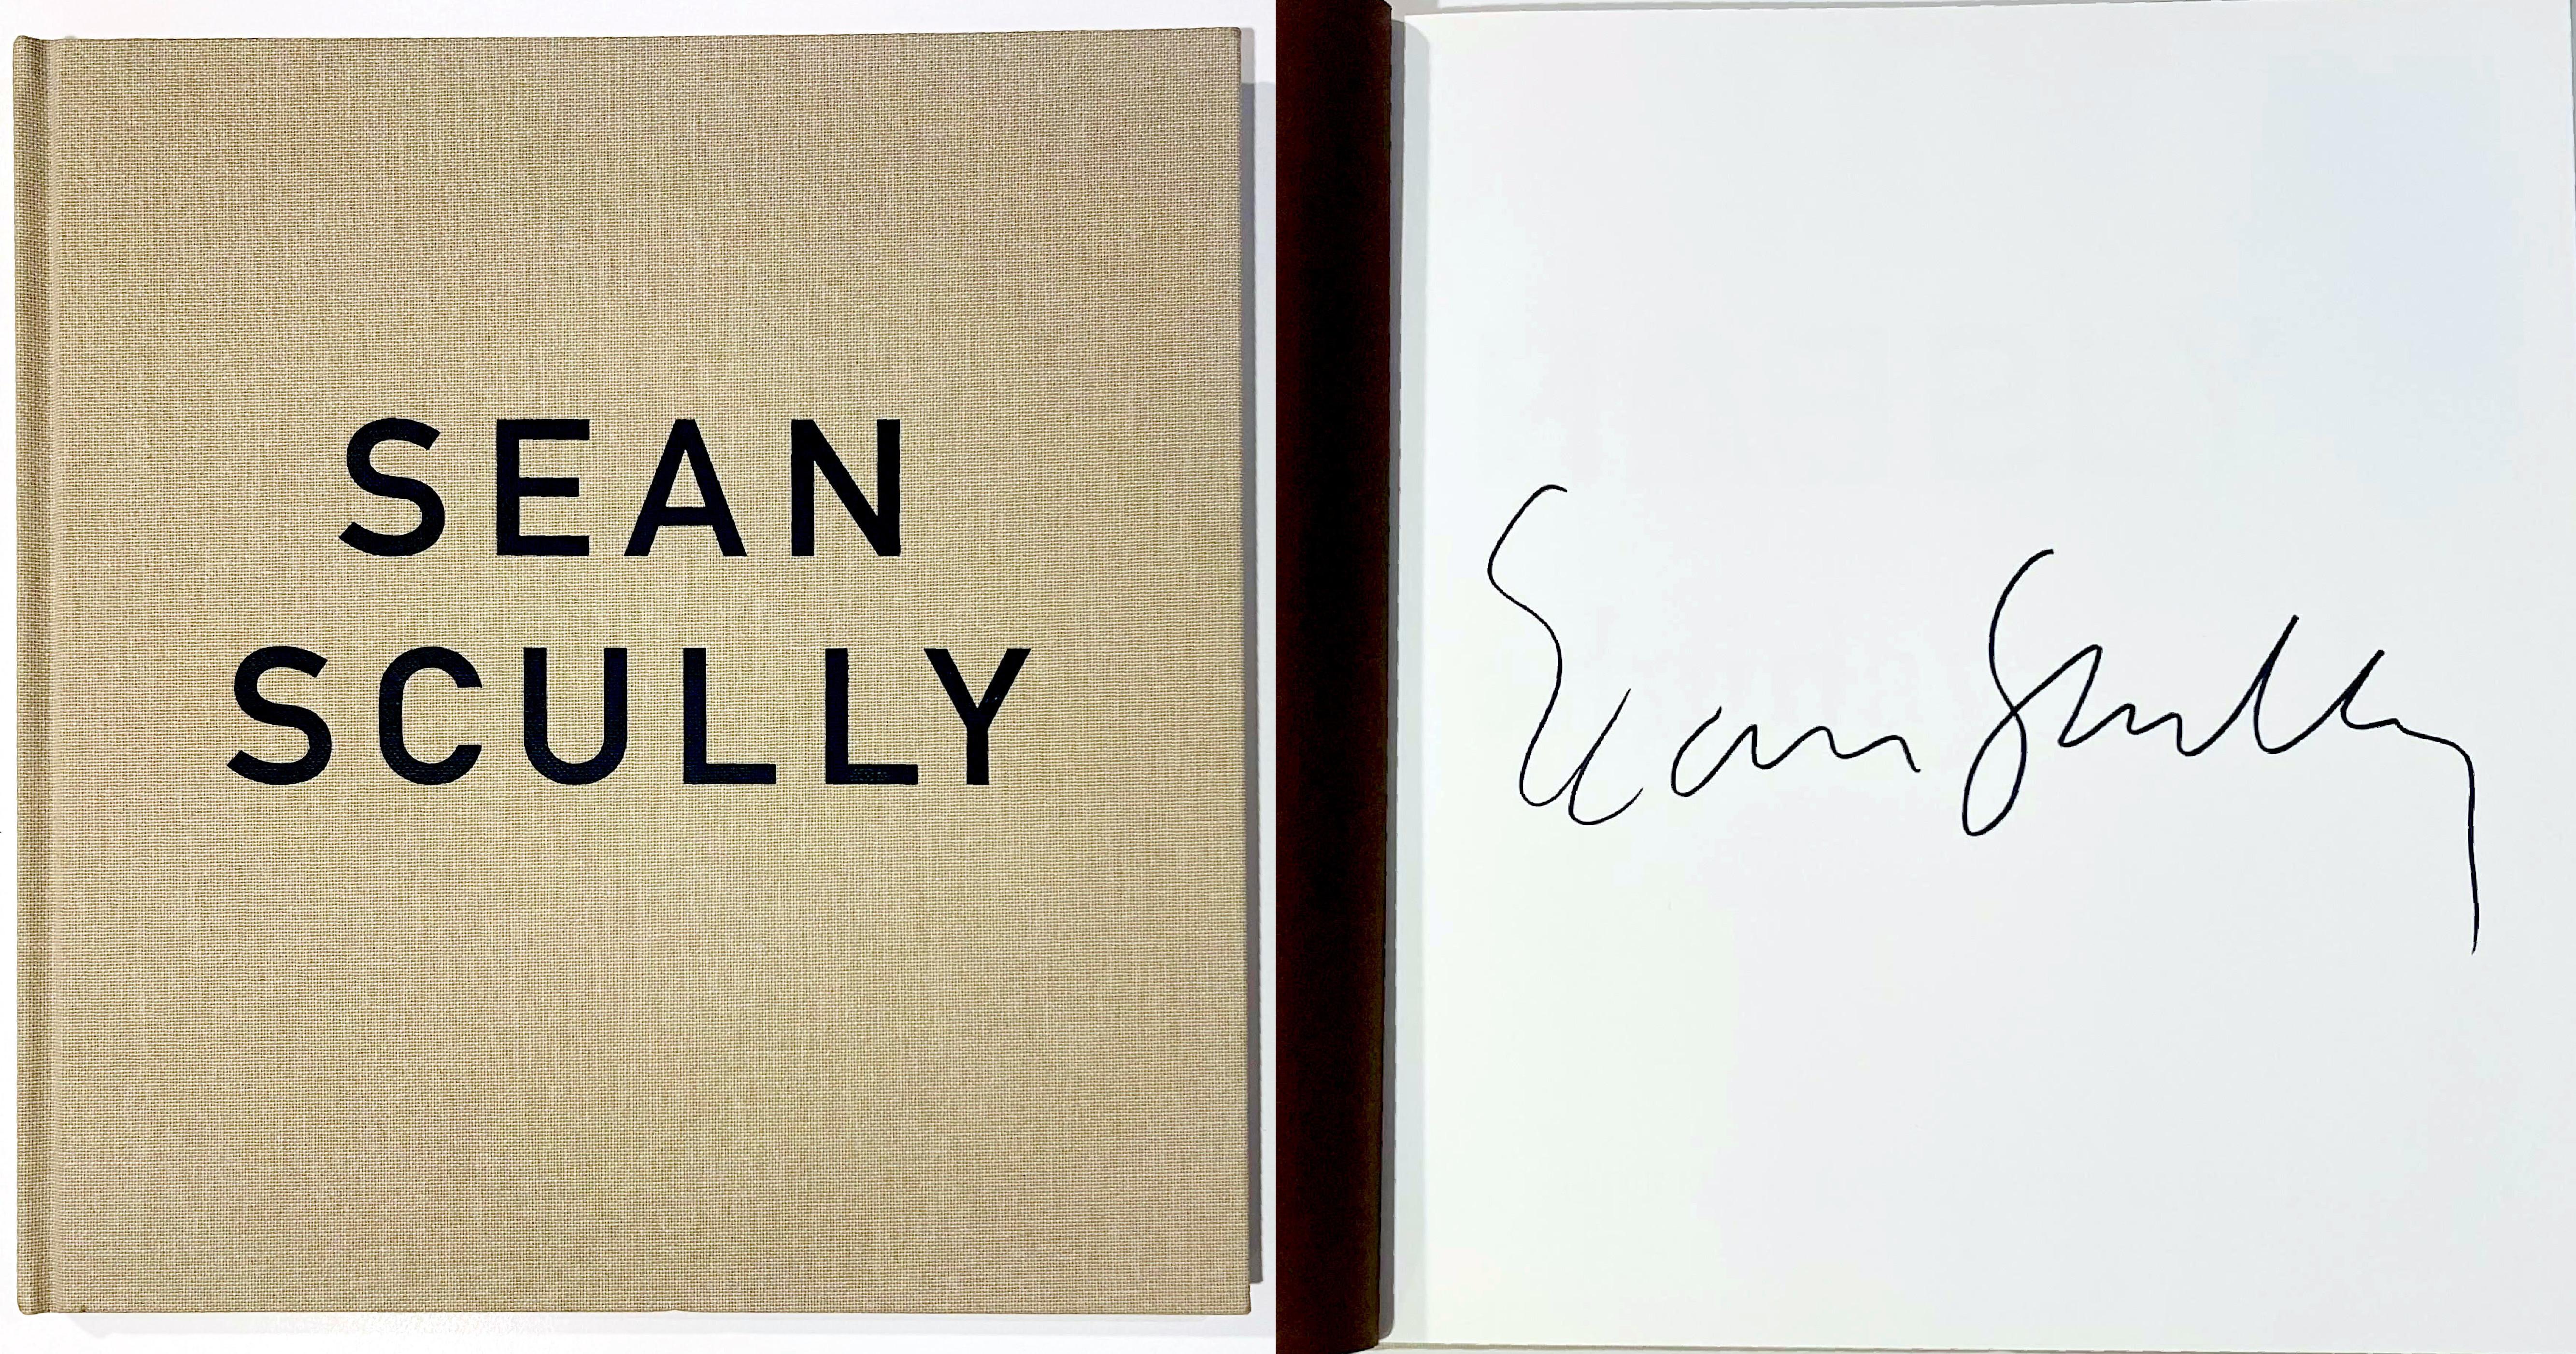 Sean Scully Night and Day (hardback monograph, hand signed by Sean Scully)